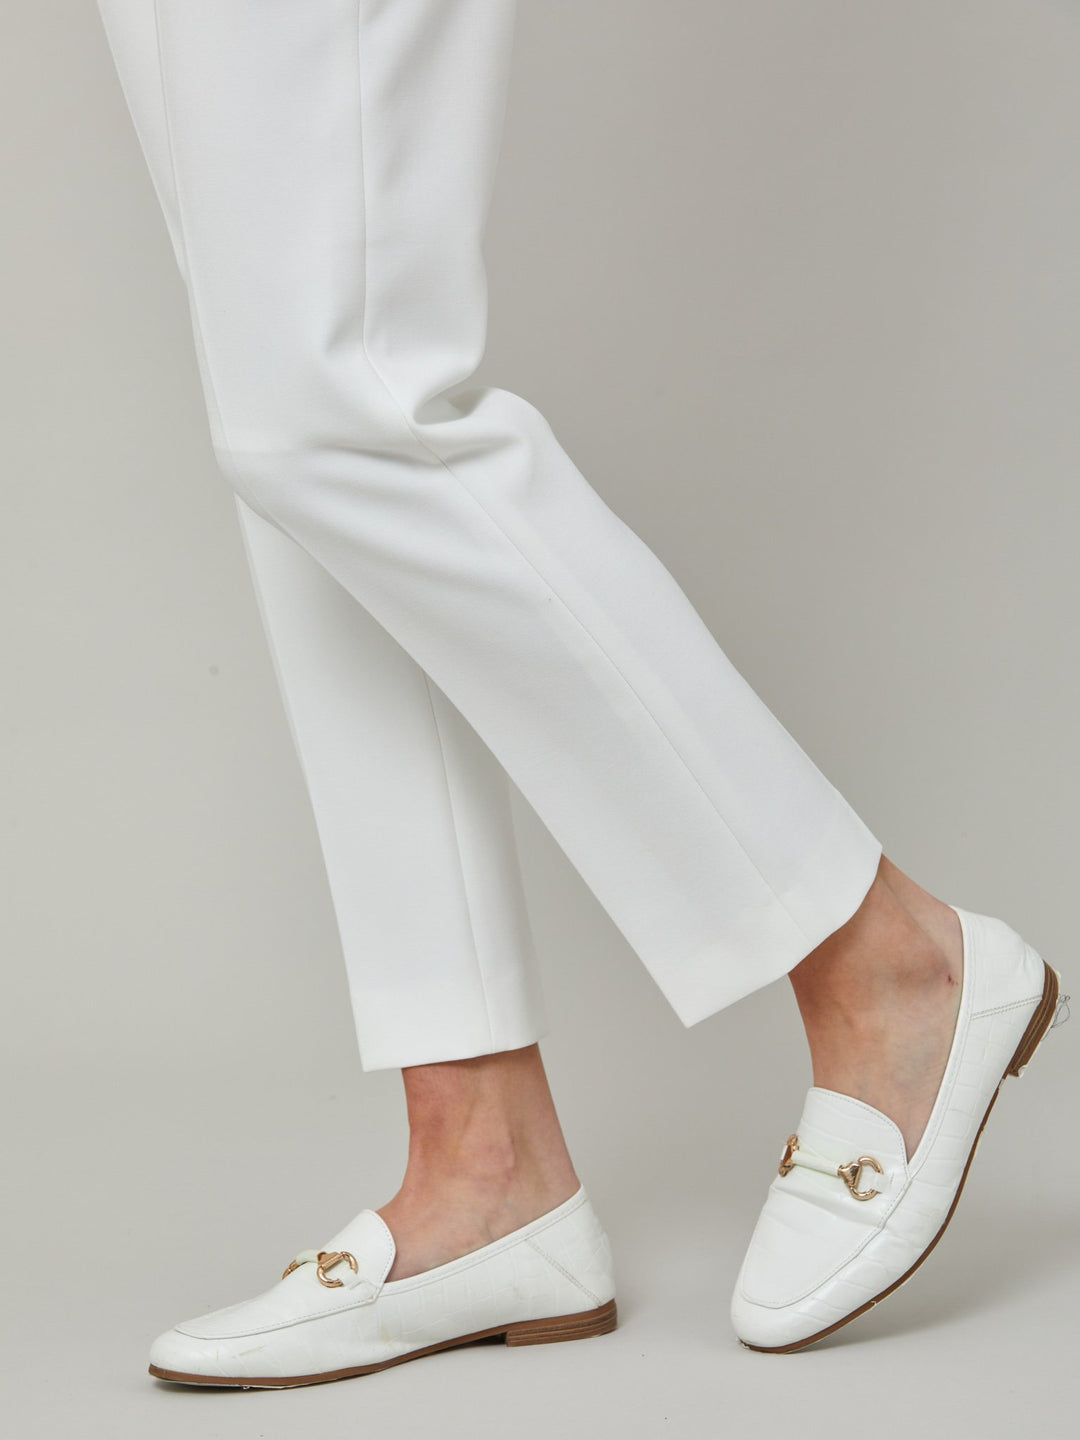 jill  Investment-worthy, neat narrow-leg trouser with a hint of stretch. A wardrobe staple and HMcA classic, here in optical white.